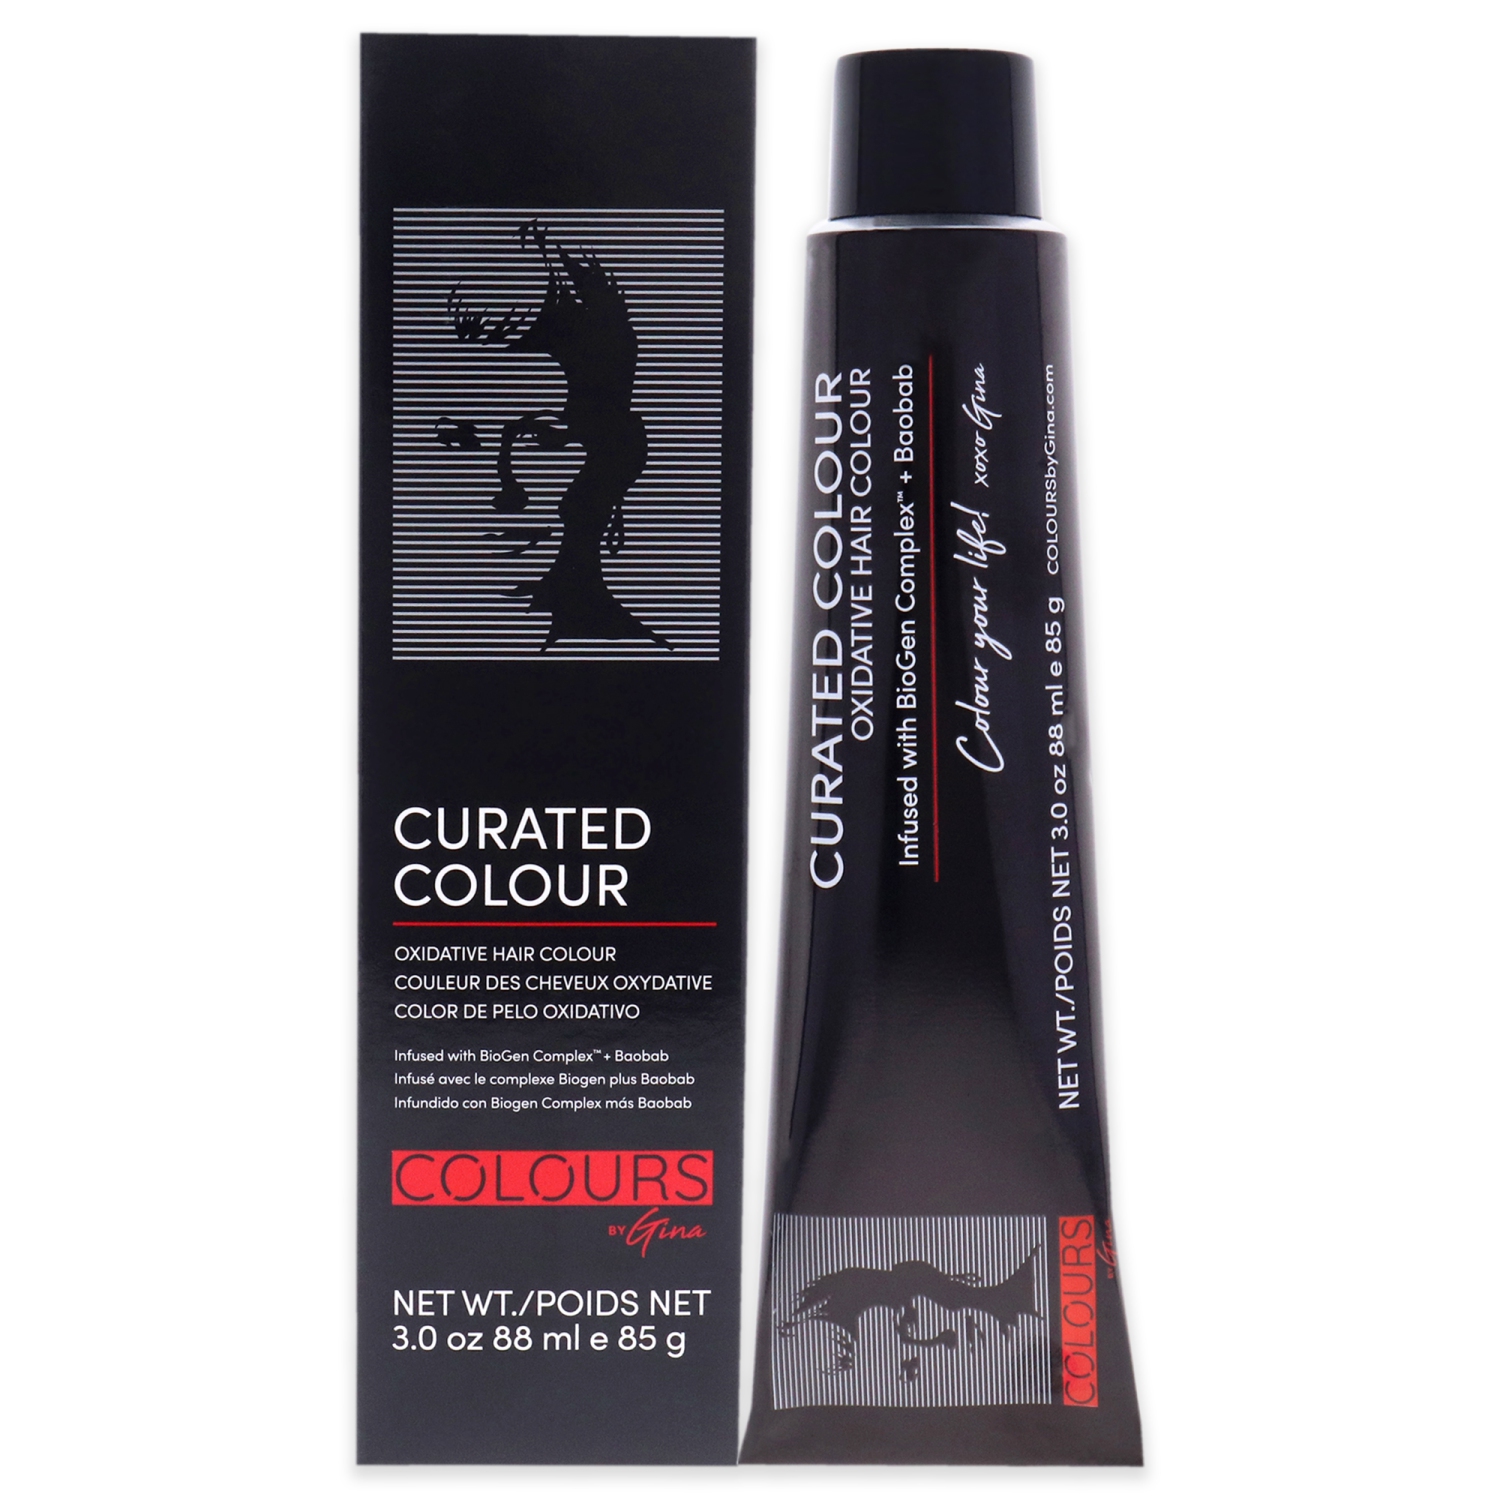 Curated Colour - 2.0-2N Darkest Natural Brown by Colours By Gina for Unisex - 3 oz Hair Color